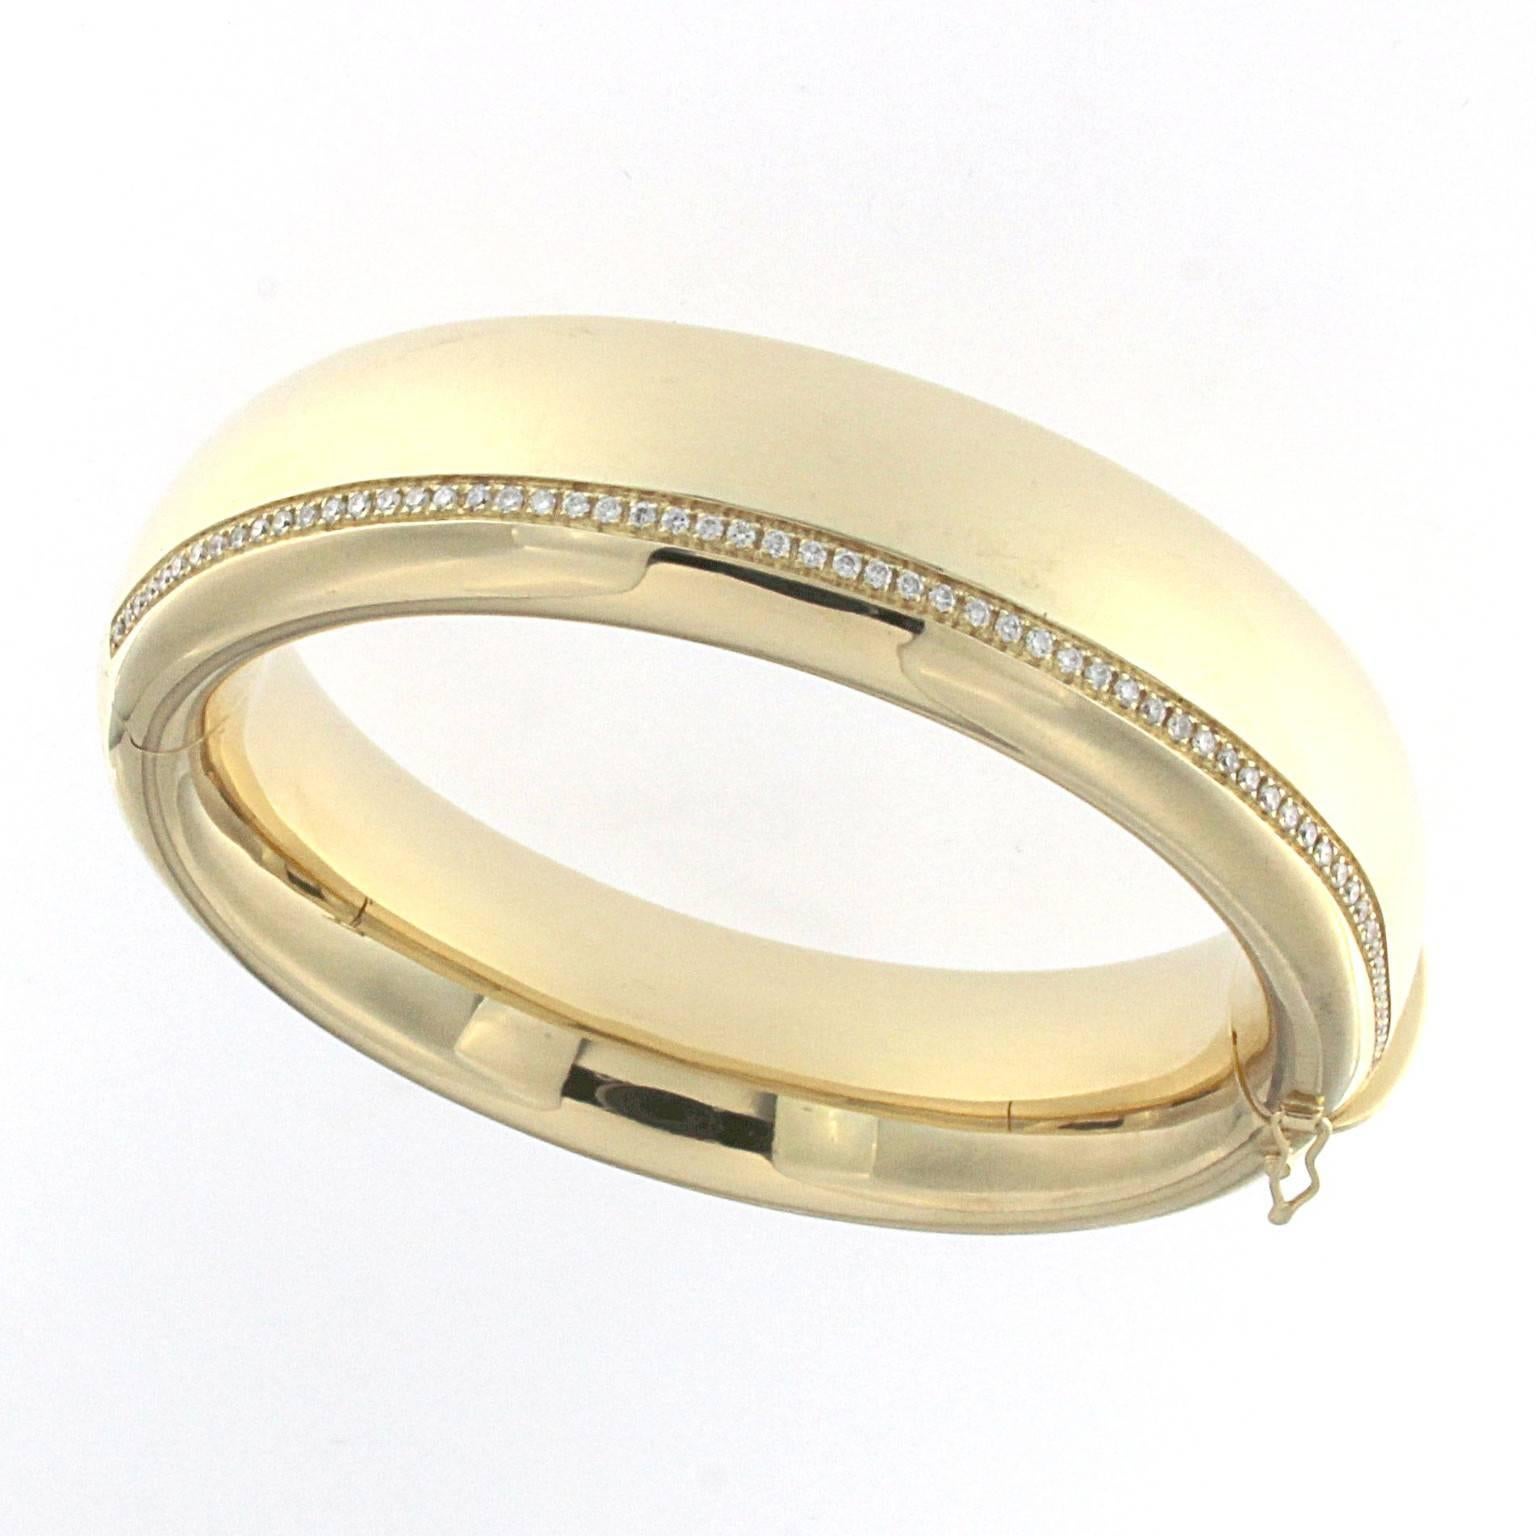 Essence bangle in 18 kt  yellow gold and white diamonds 
This classic collection in Micheletto tradition

the total weight of the gold is  gr 95.70
the total weight of the white diamonds is ct 1.52 - color GH clarity VVS1

STAMP: 10 MI ITALY